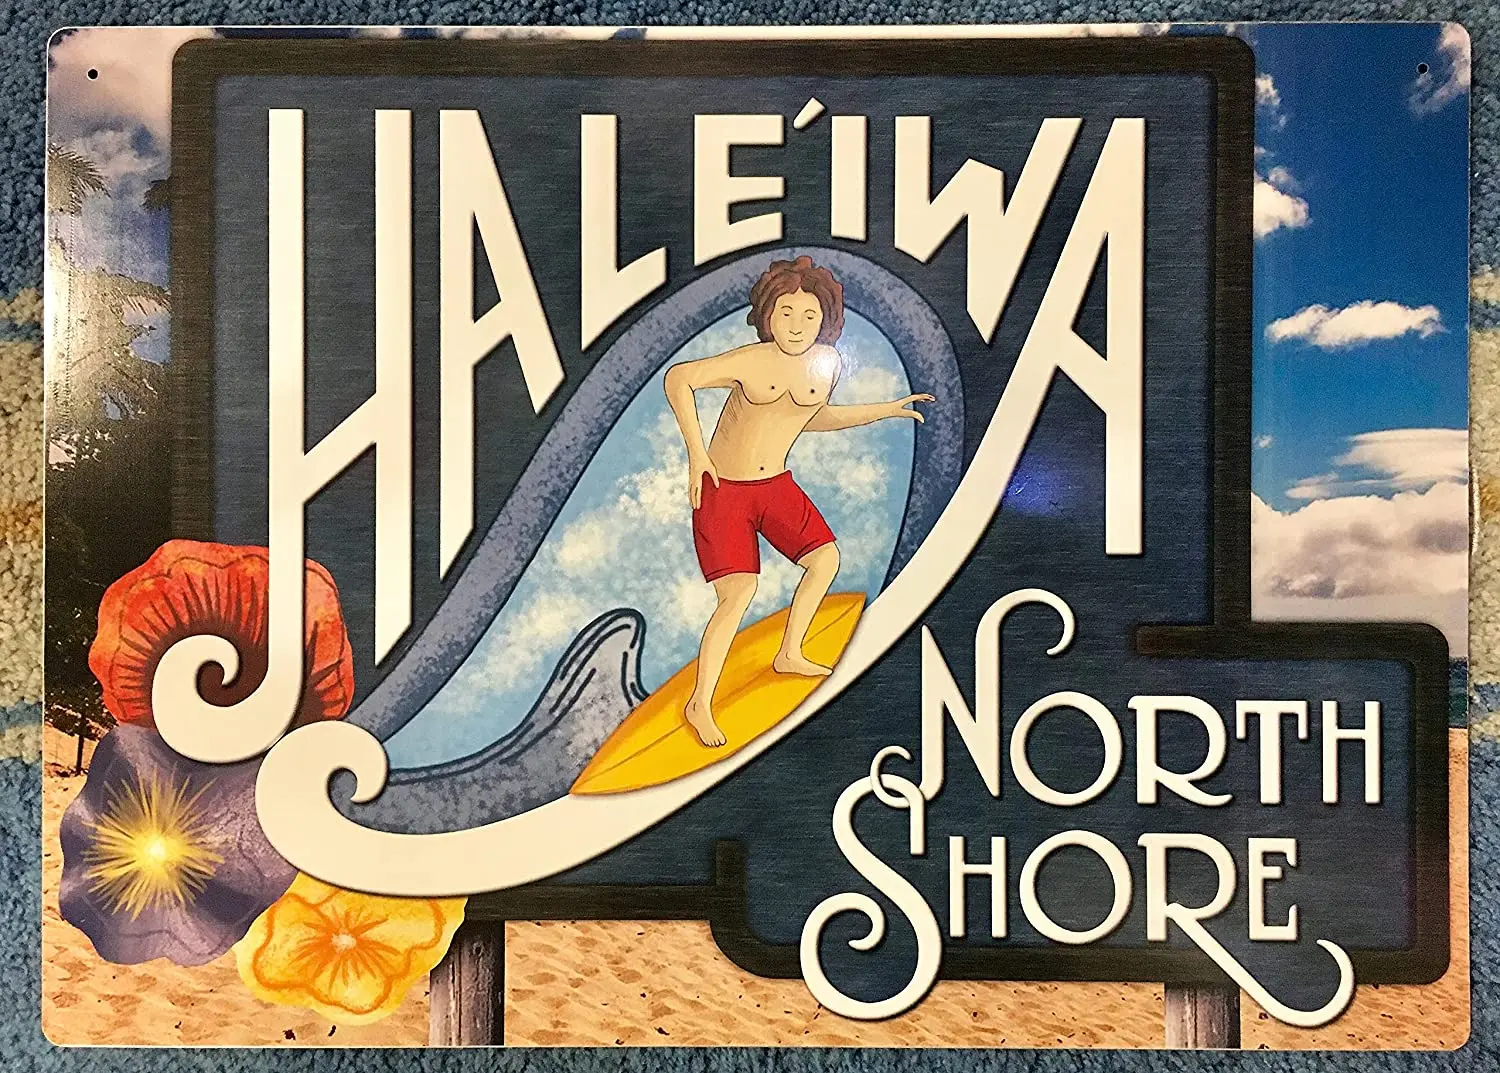 

Haleiwa North Shore Poster Tin Sign Metal Plaque Home Club Club Beach Wall Decoration Retro Metal Plate Ornaments 12*8 Inches